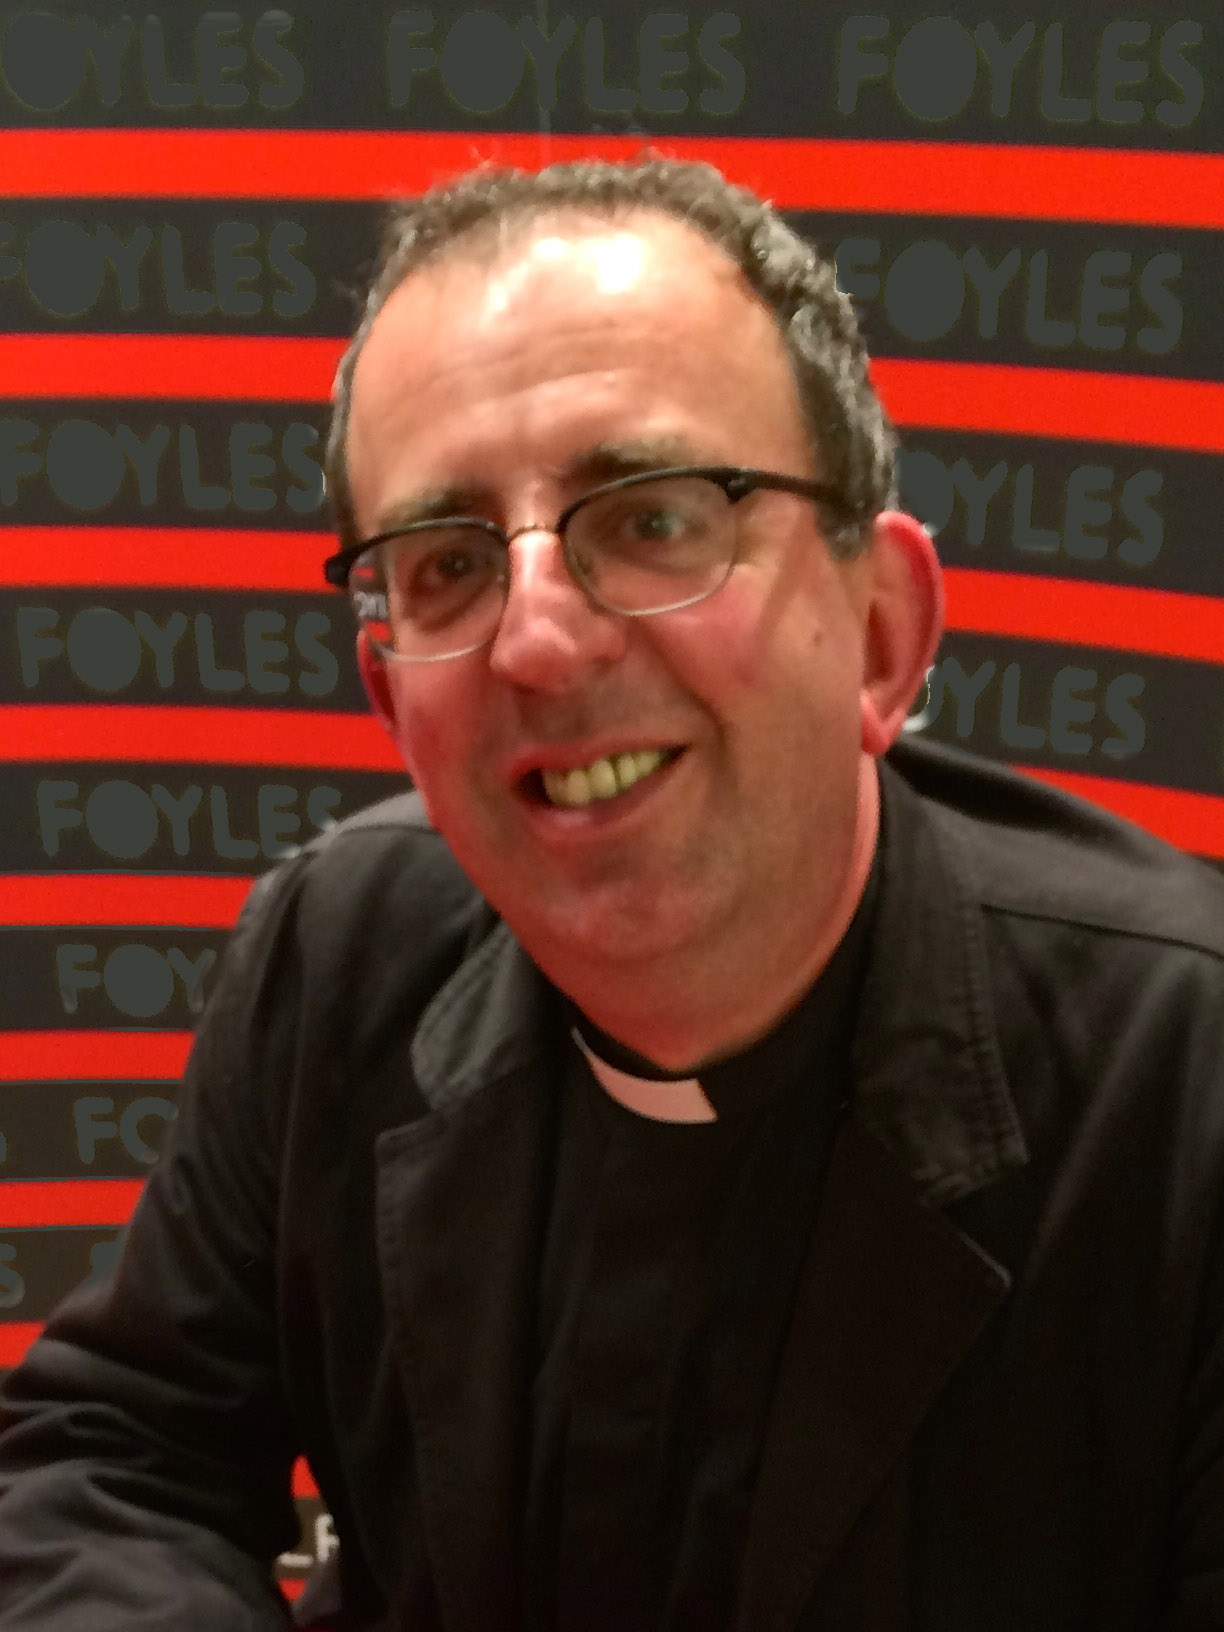 Richard Coles, Renowned Singer and Clergyman, Reveals Struggles and Successes in Candid Autobiography Release from Northampton, England.